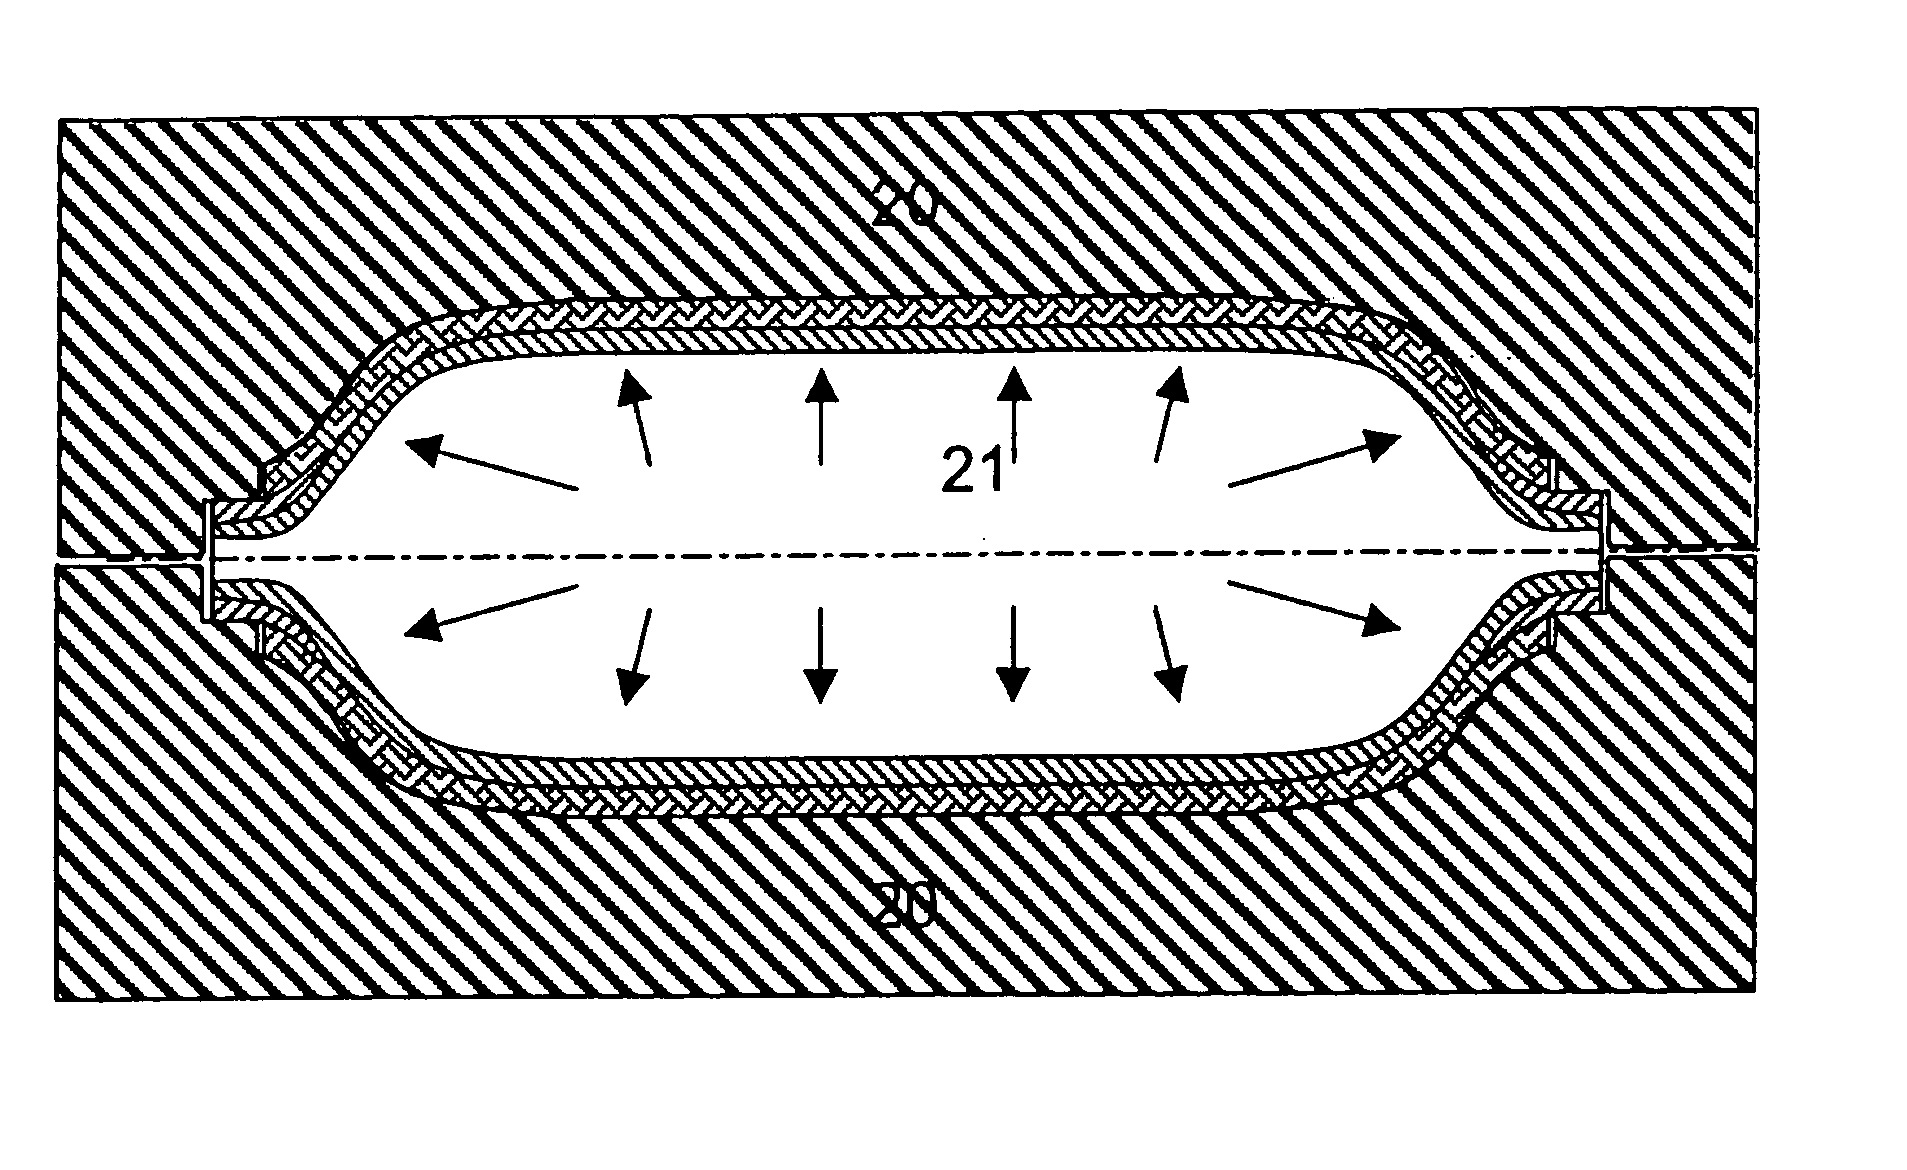 Non-isothermal method for fabricating hollow composite parts